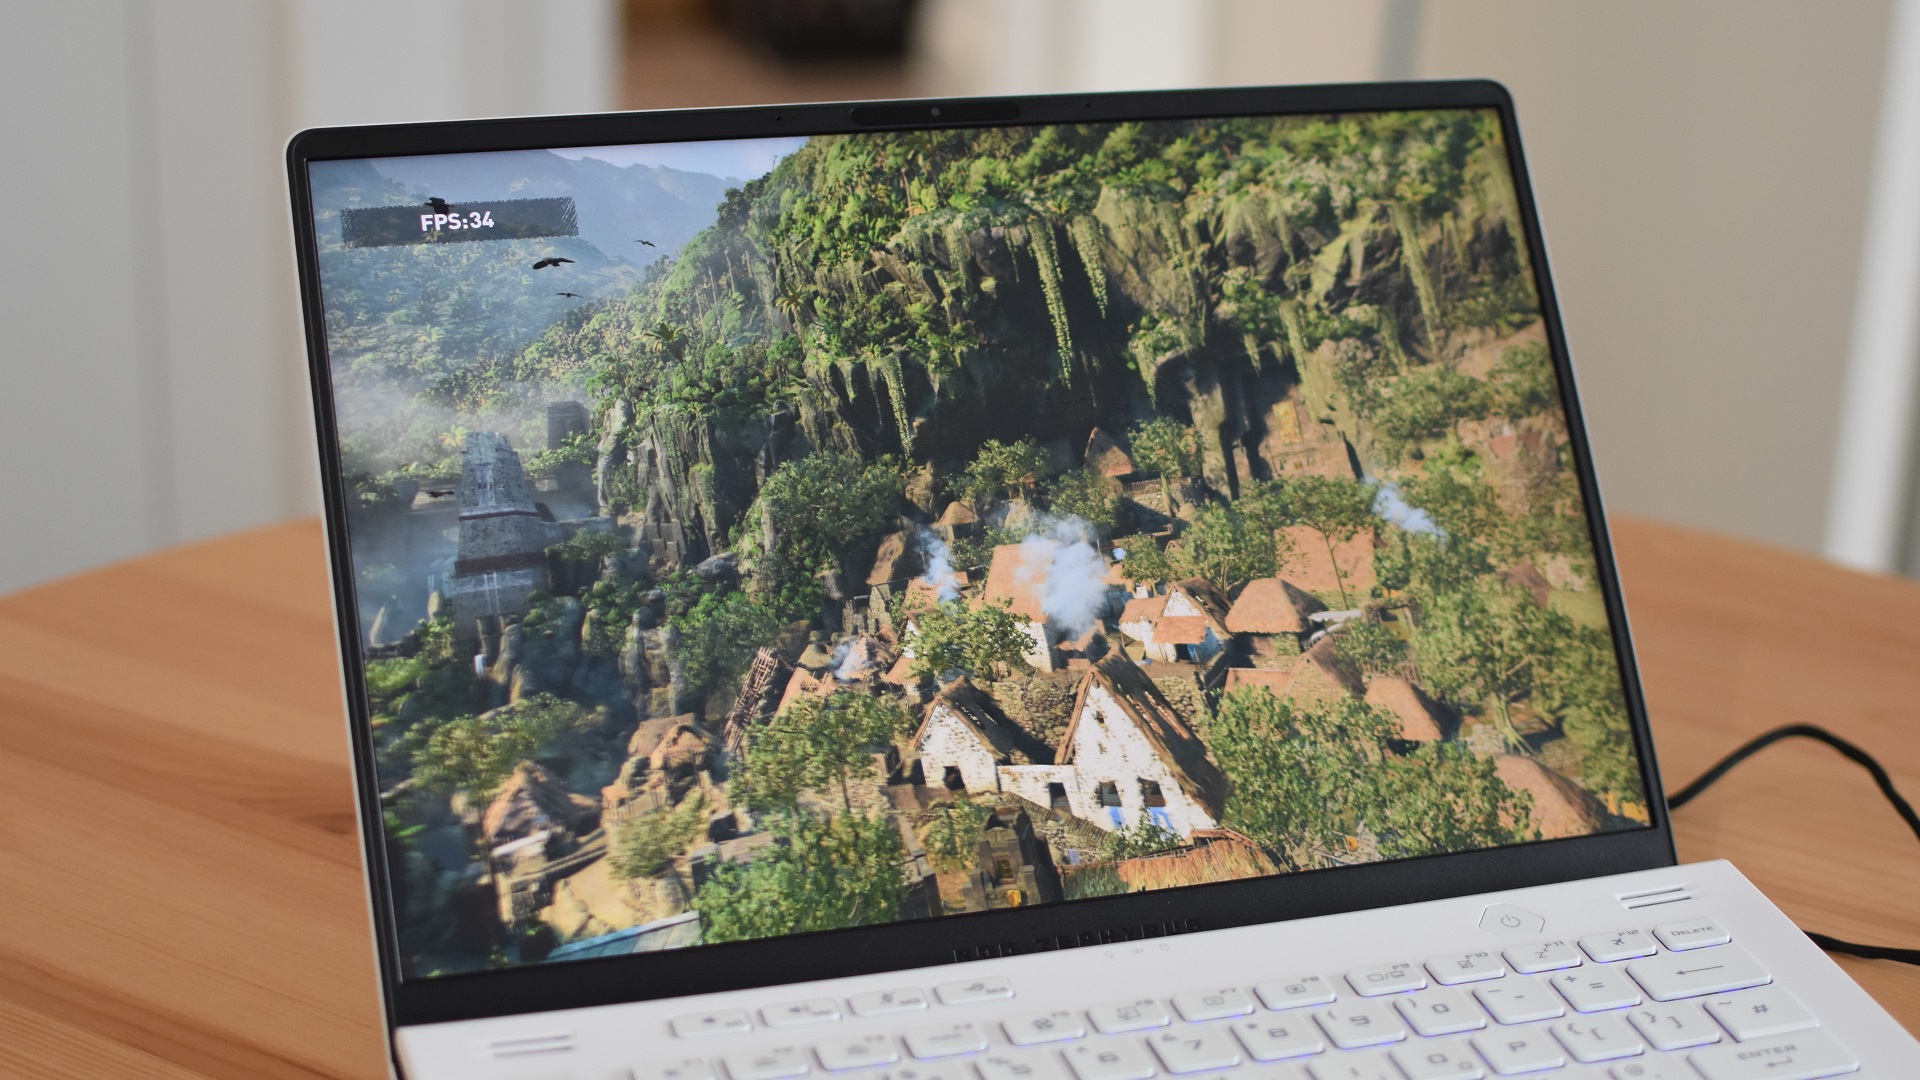 Shadow of the Tomb Raider running on the Asus ROG Zephyrus G14 gaming laptop.